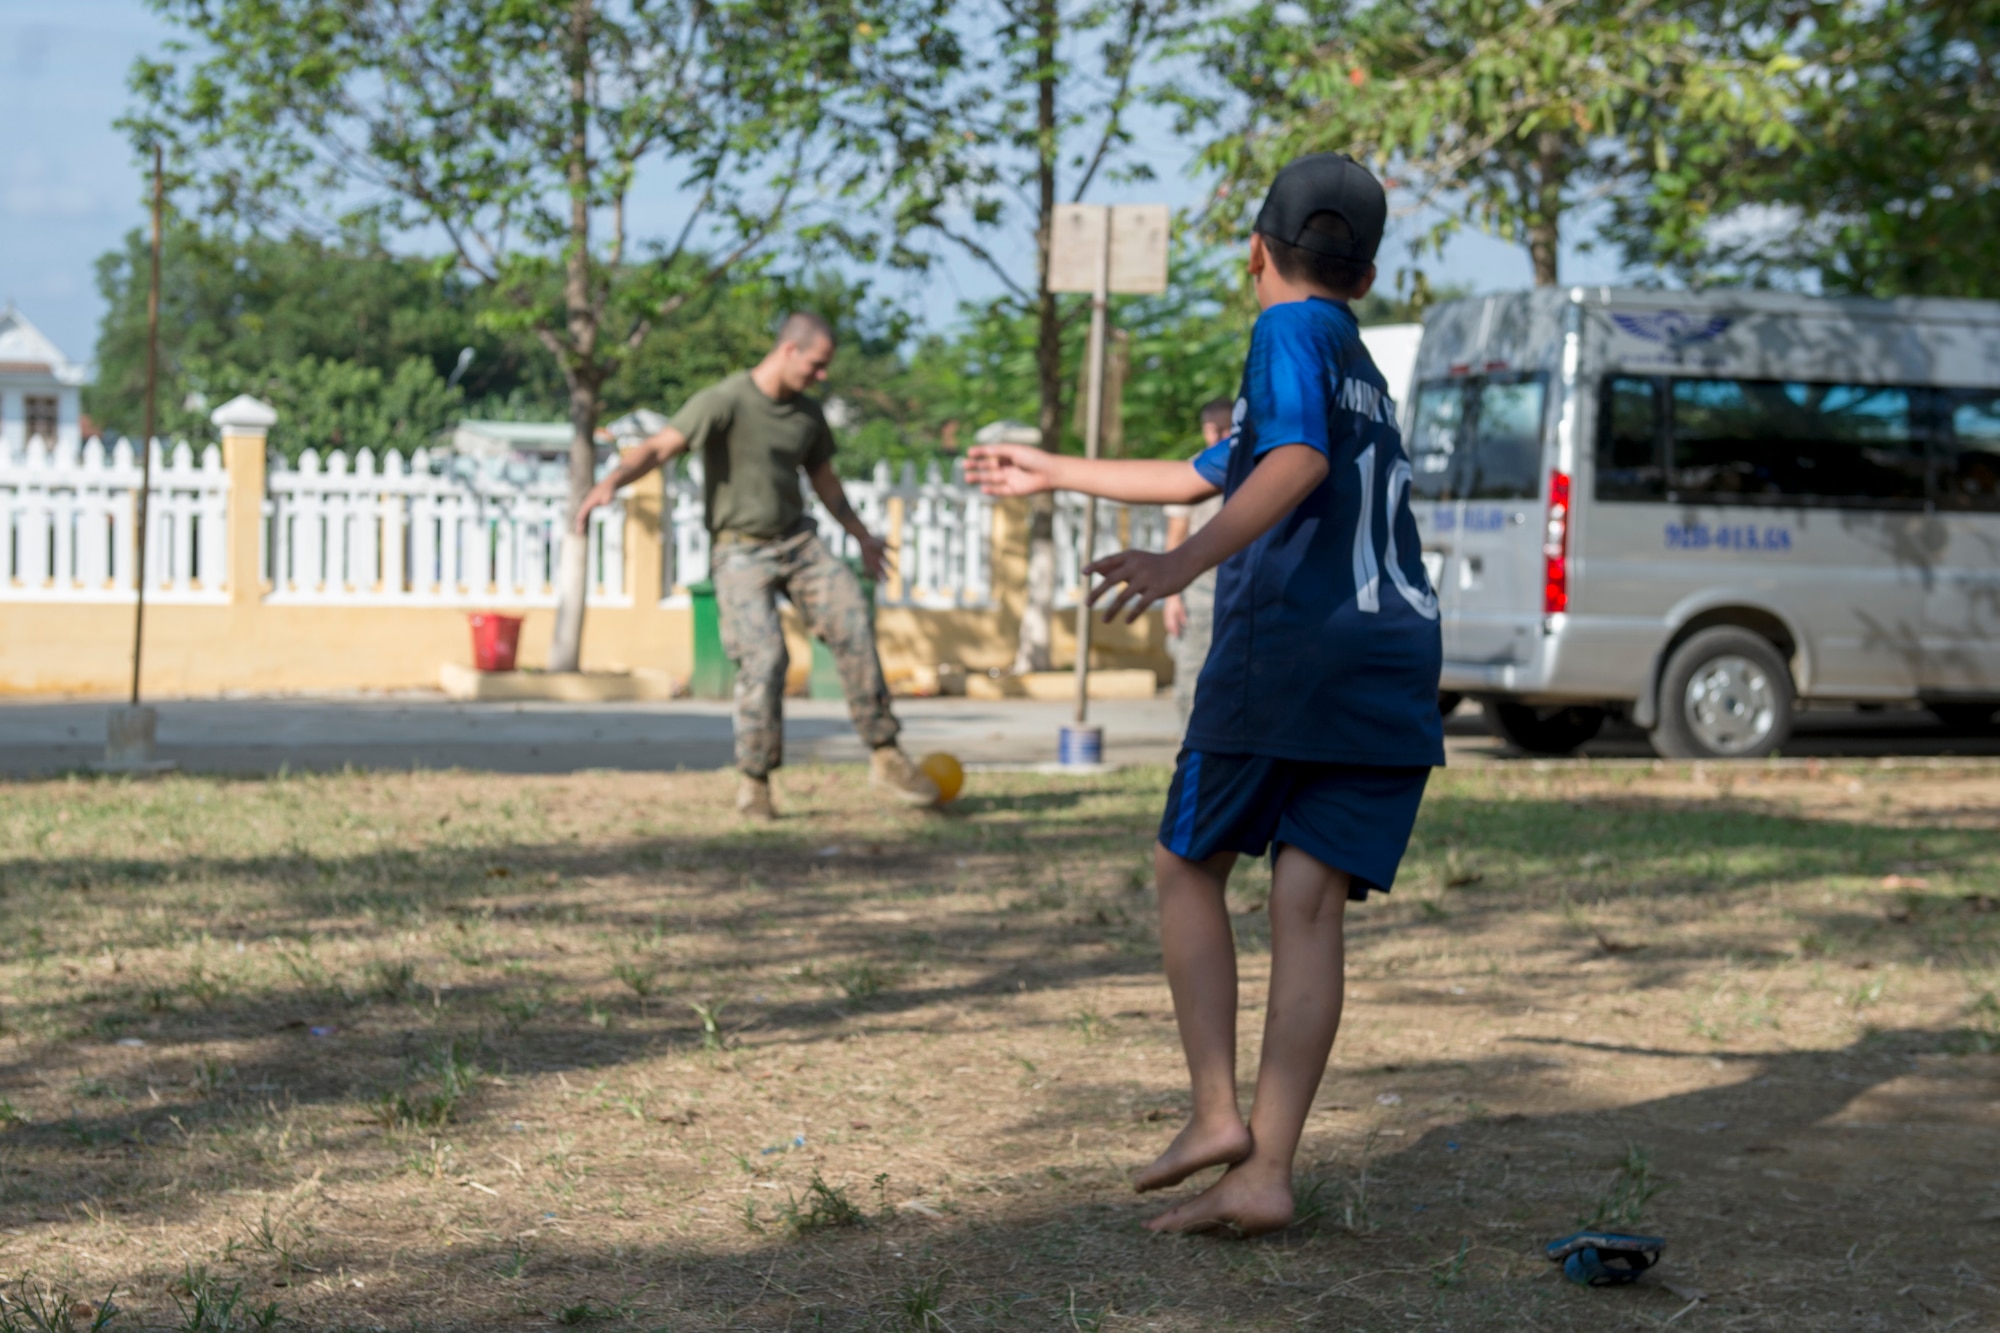 U.S. Marine Corps Cpl. David Ricketts, 7th Engineer Support Battalion combat engineer,  plays soccer with Tien Tho Primary School students during Pacific Angel (PAC ANGEL) 18-2 in Tien Tho commune, Tien Phuoc district, Vietnam, Sept. 10, 2018.